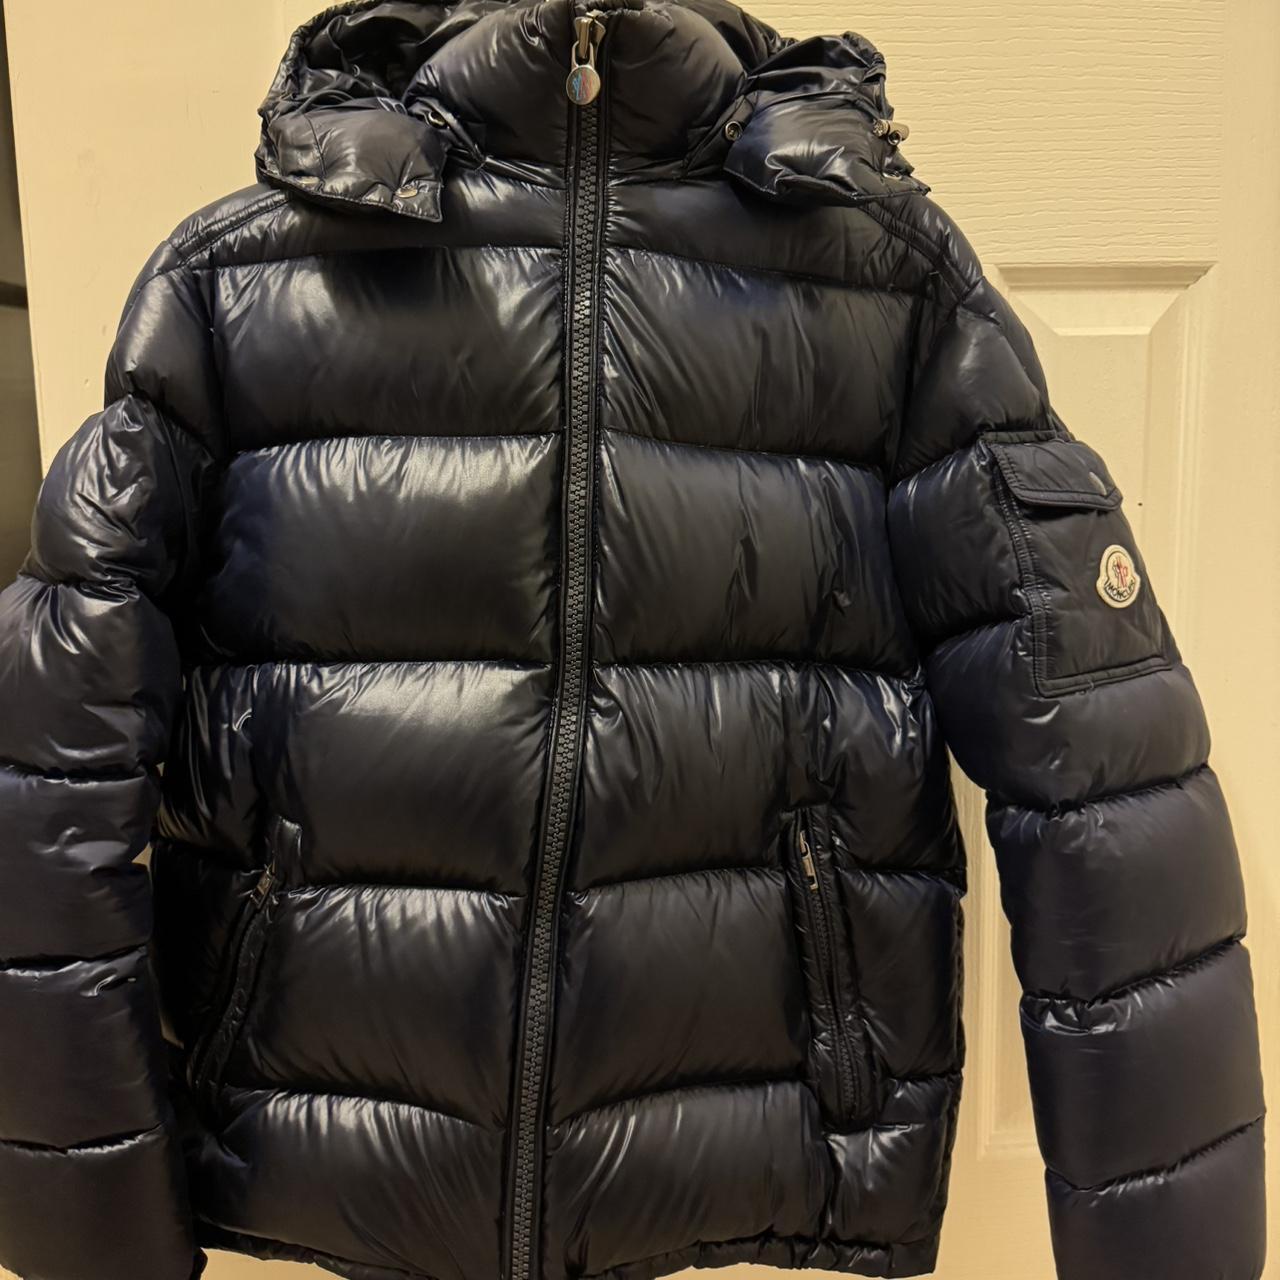 Small Moncler coat hardly worn message before buying - Depop